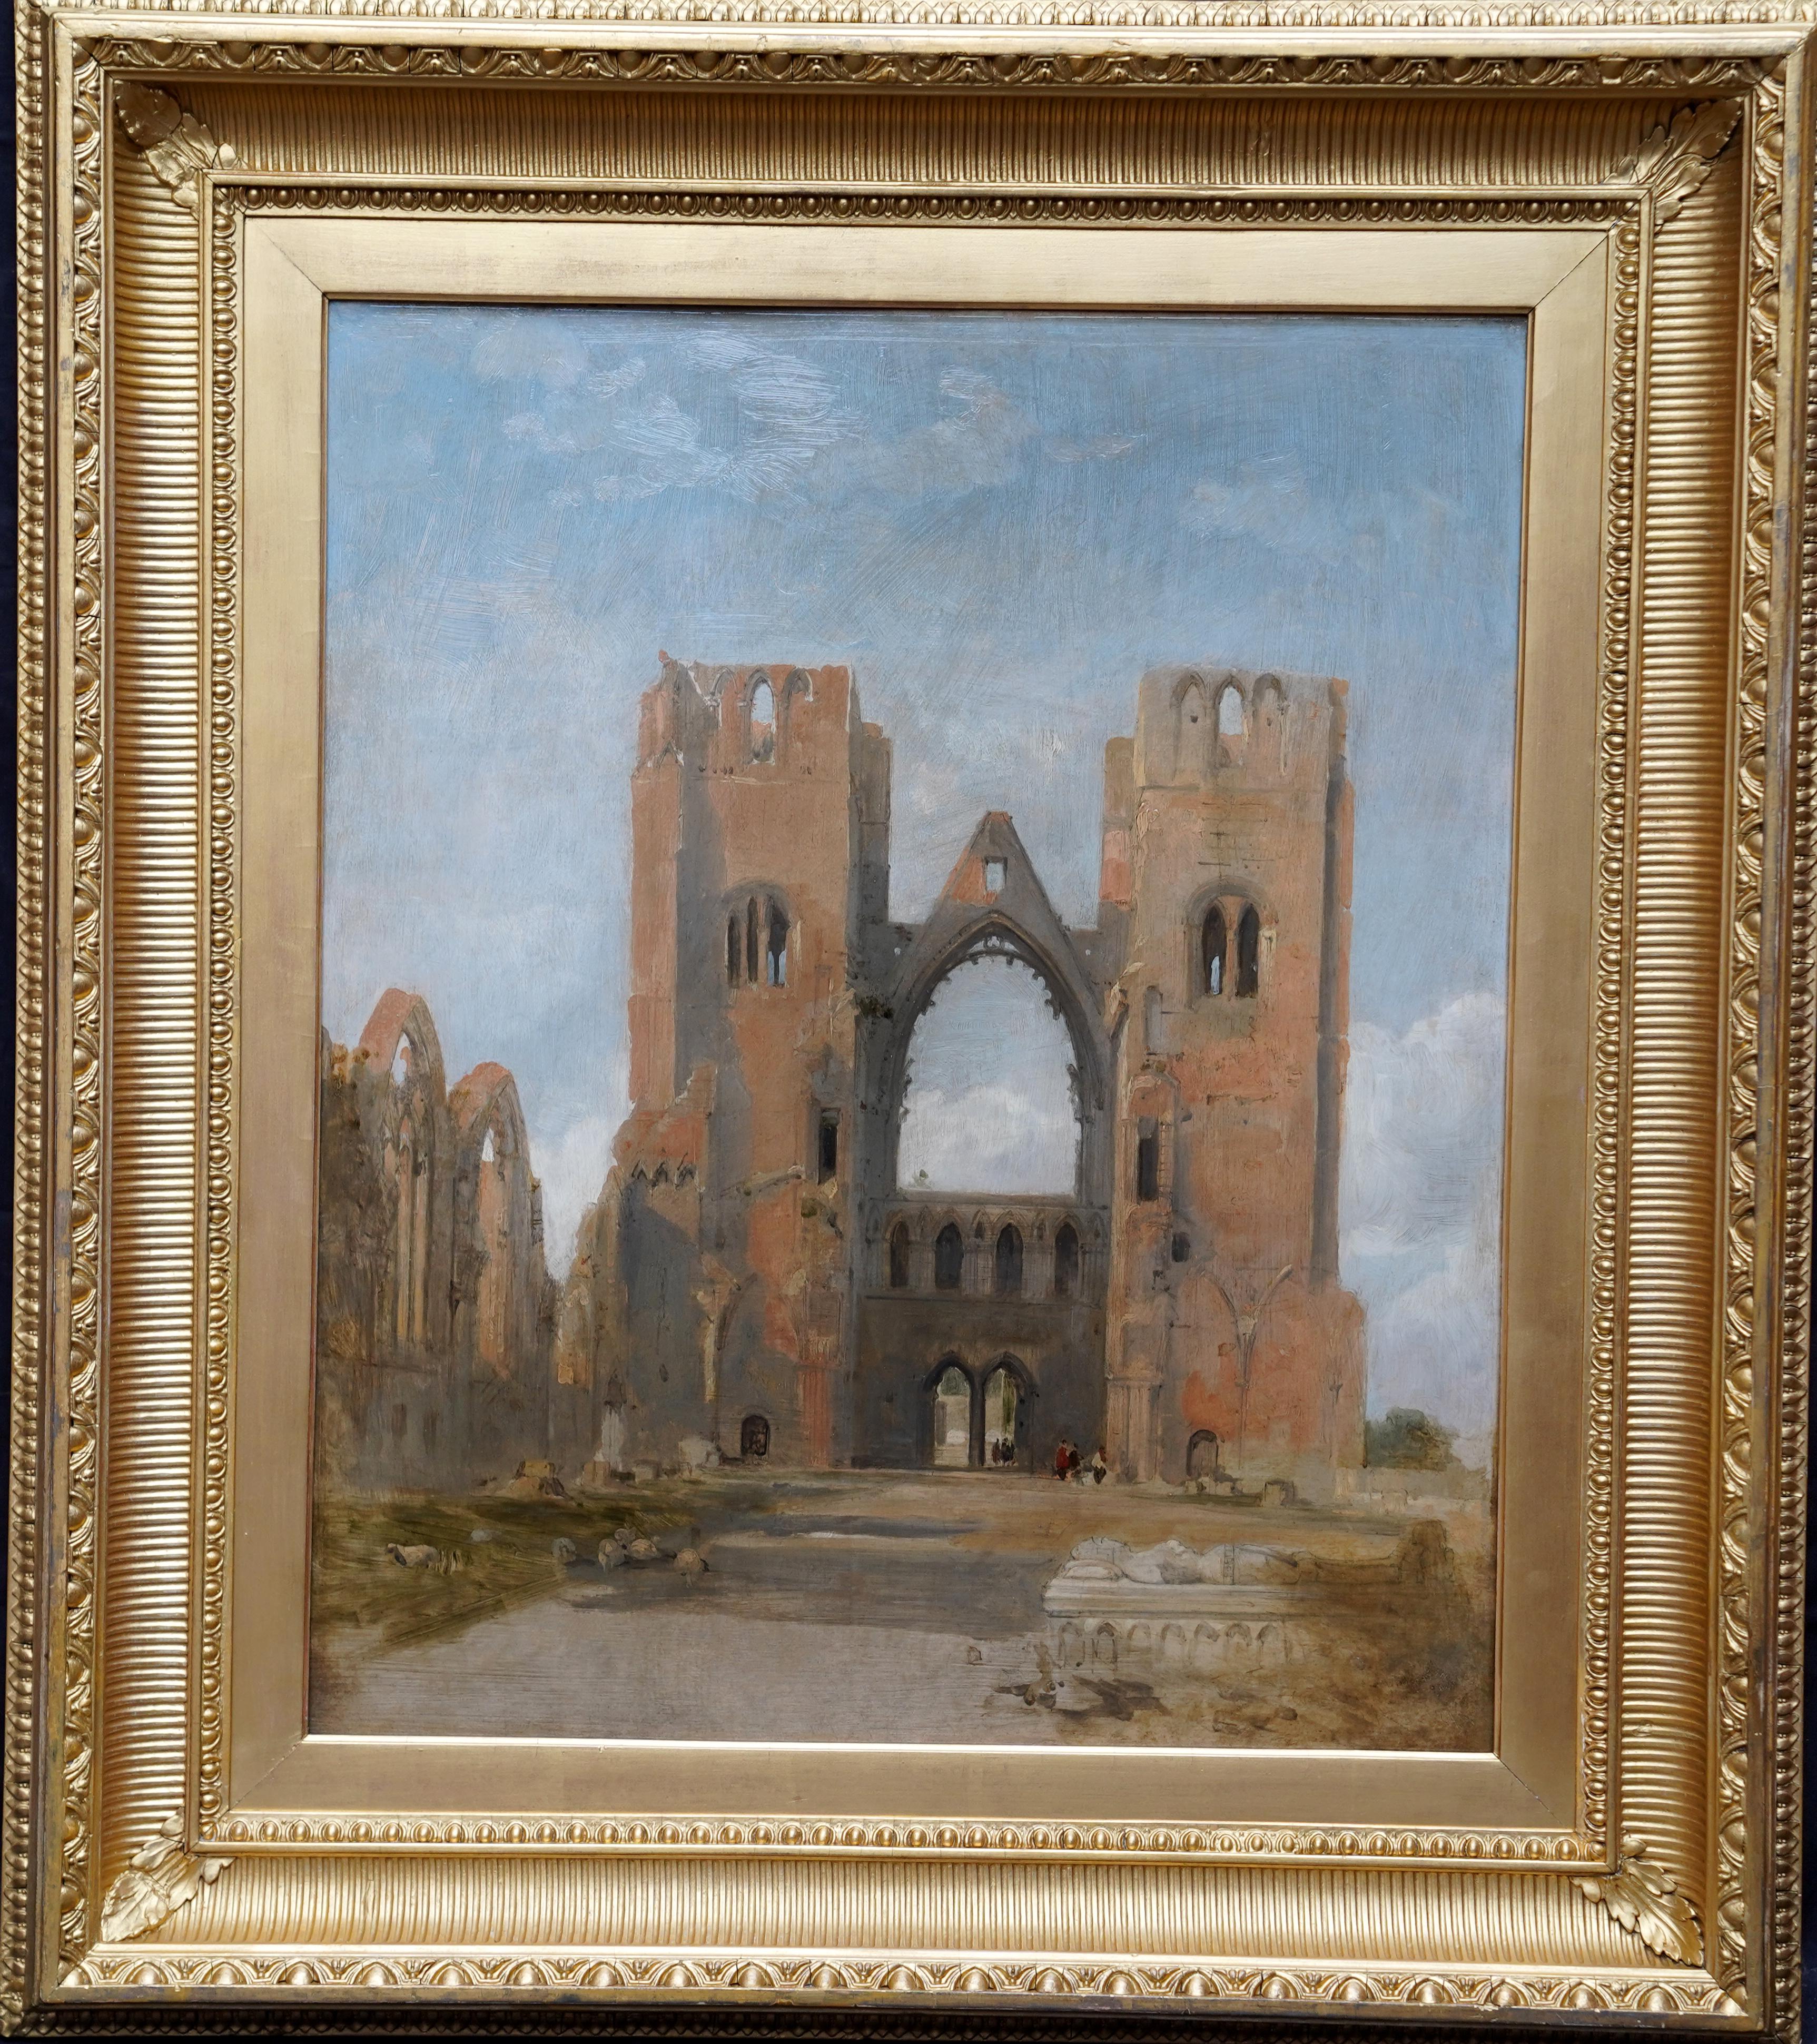 David Roberts Landscape Painting - Elgin Cathedral Ruins - Scottish 19thC art architectural landscape oil painting